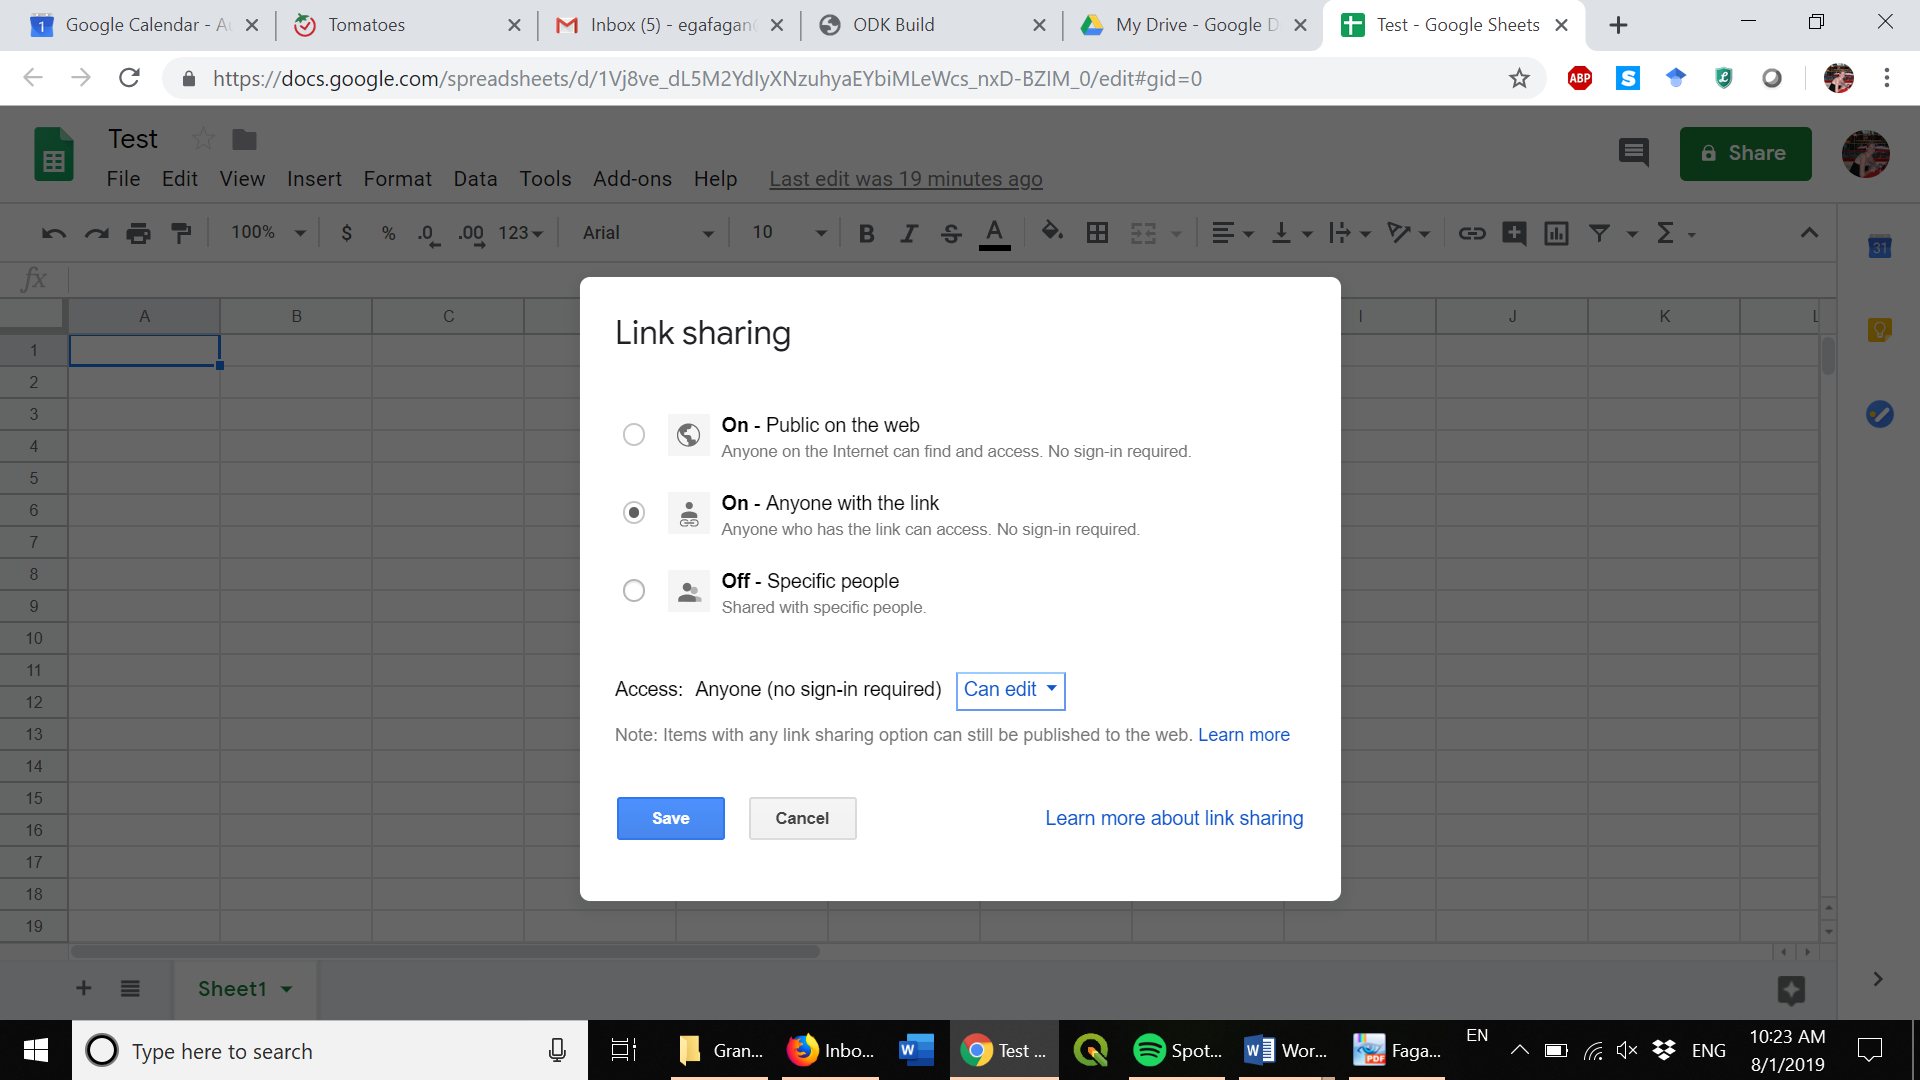 Sharing privileges on Google Sheets